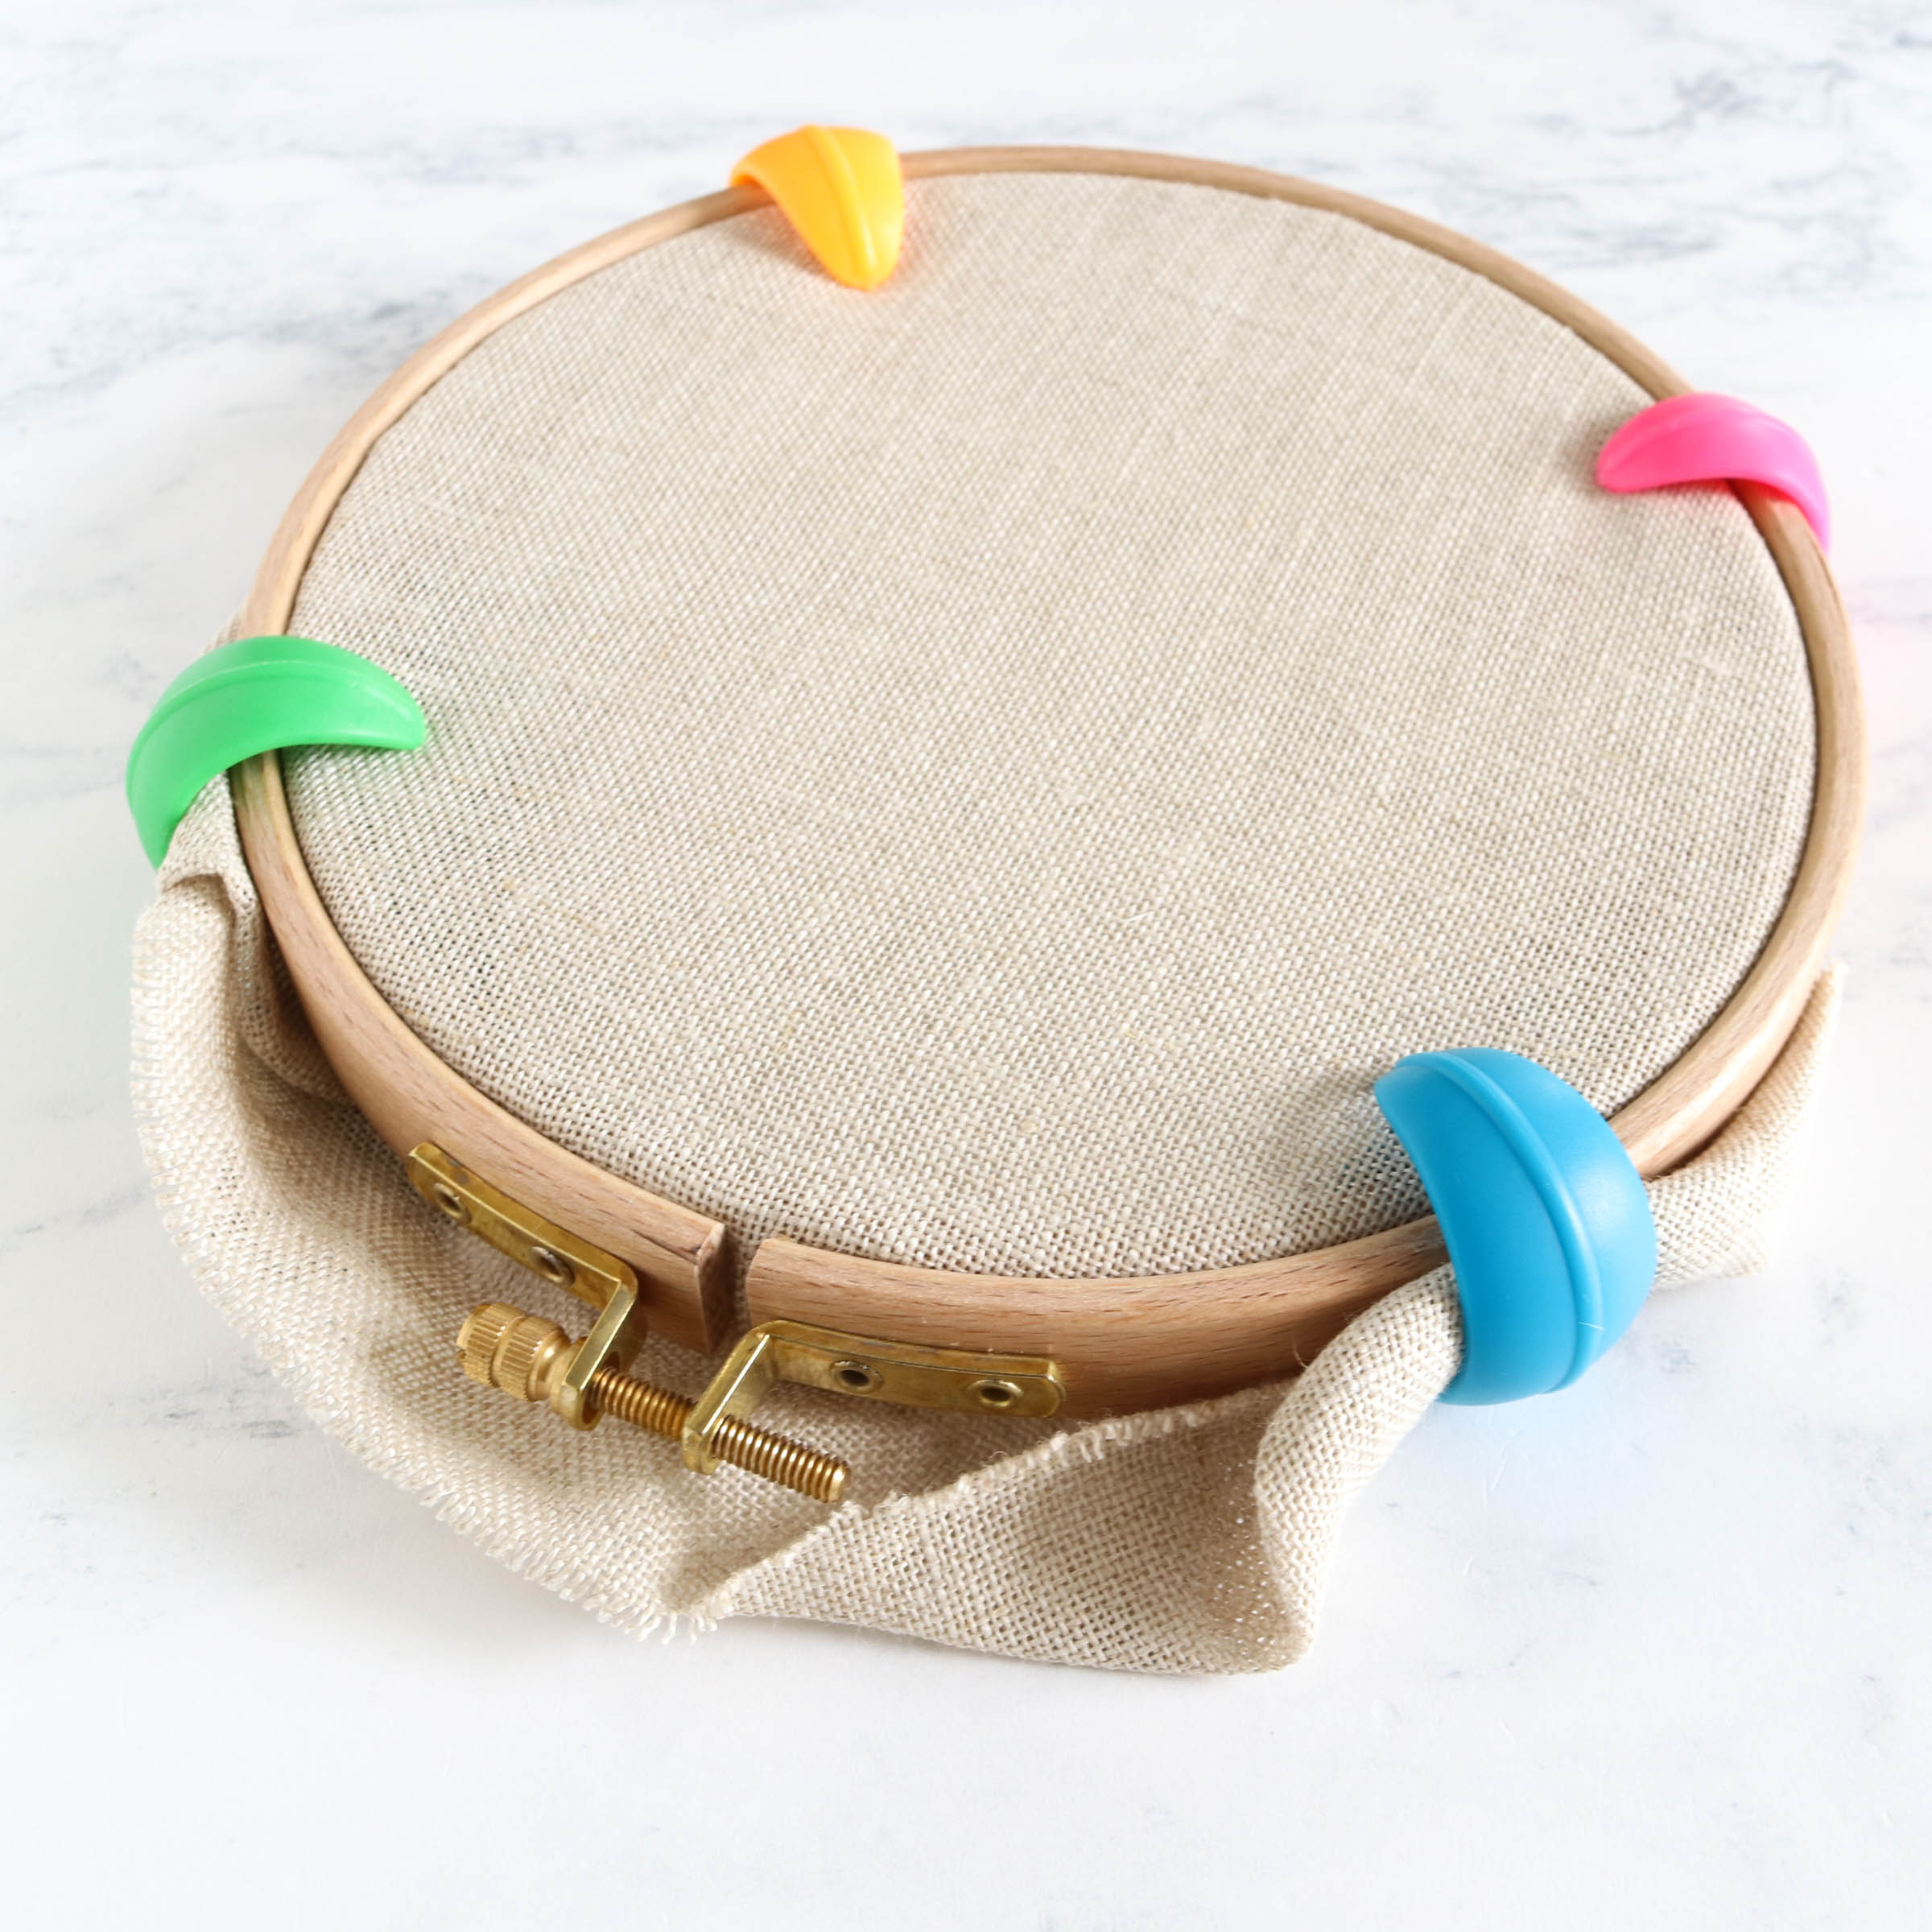 Embroidery Hoops, Excess Fabric, & Huggers! –